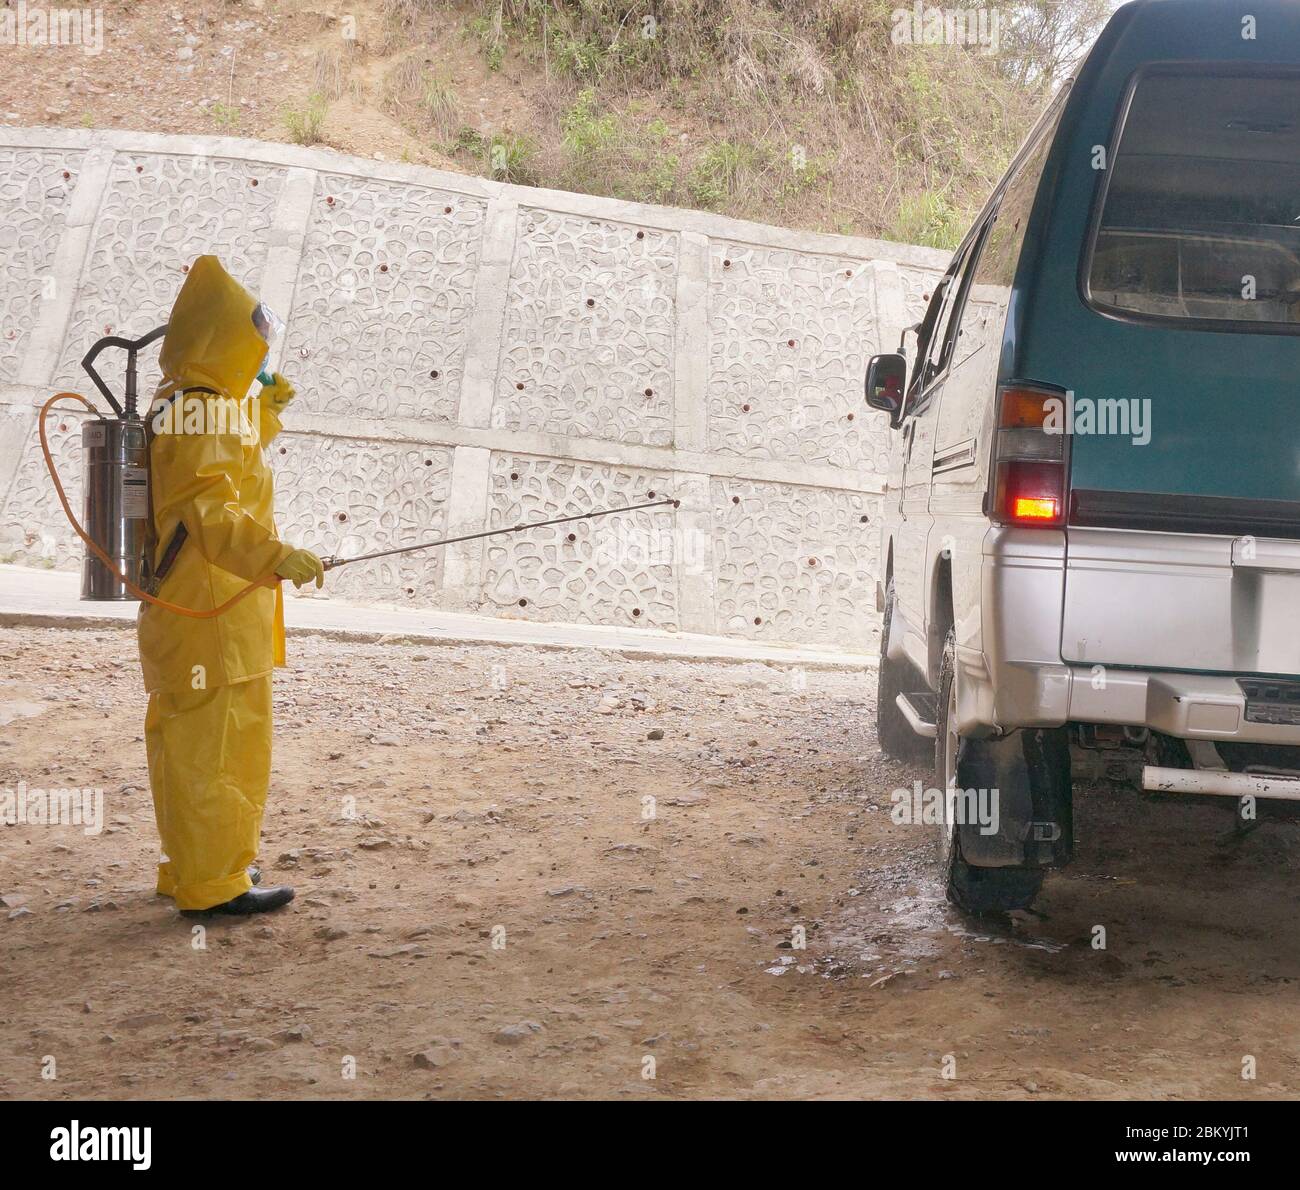 A personnel spraying disinfectant on van, one of the procedures to contain or avoid the spread of corona virus or COVID-19. (Philippines May 6, 2020). Stock Photo